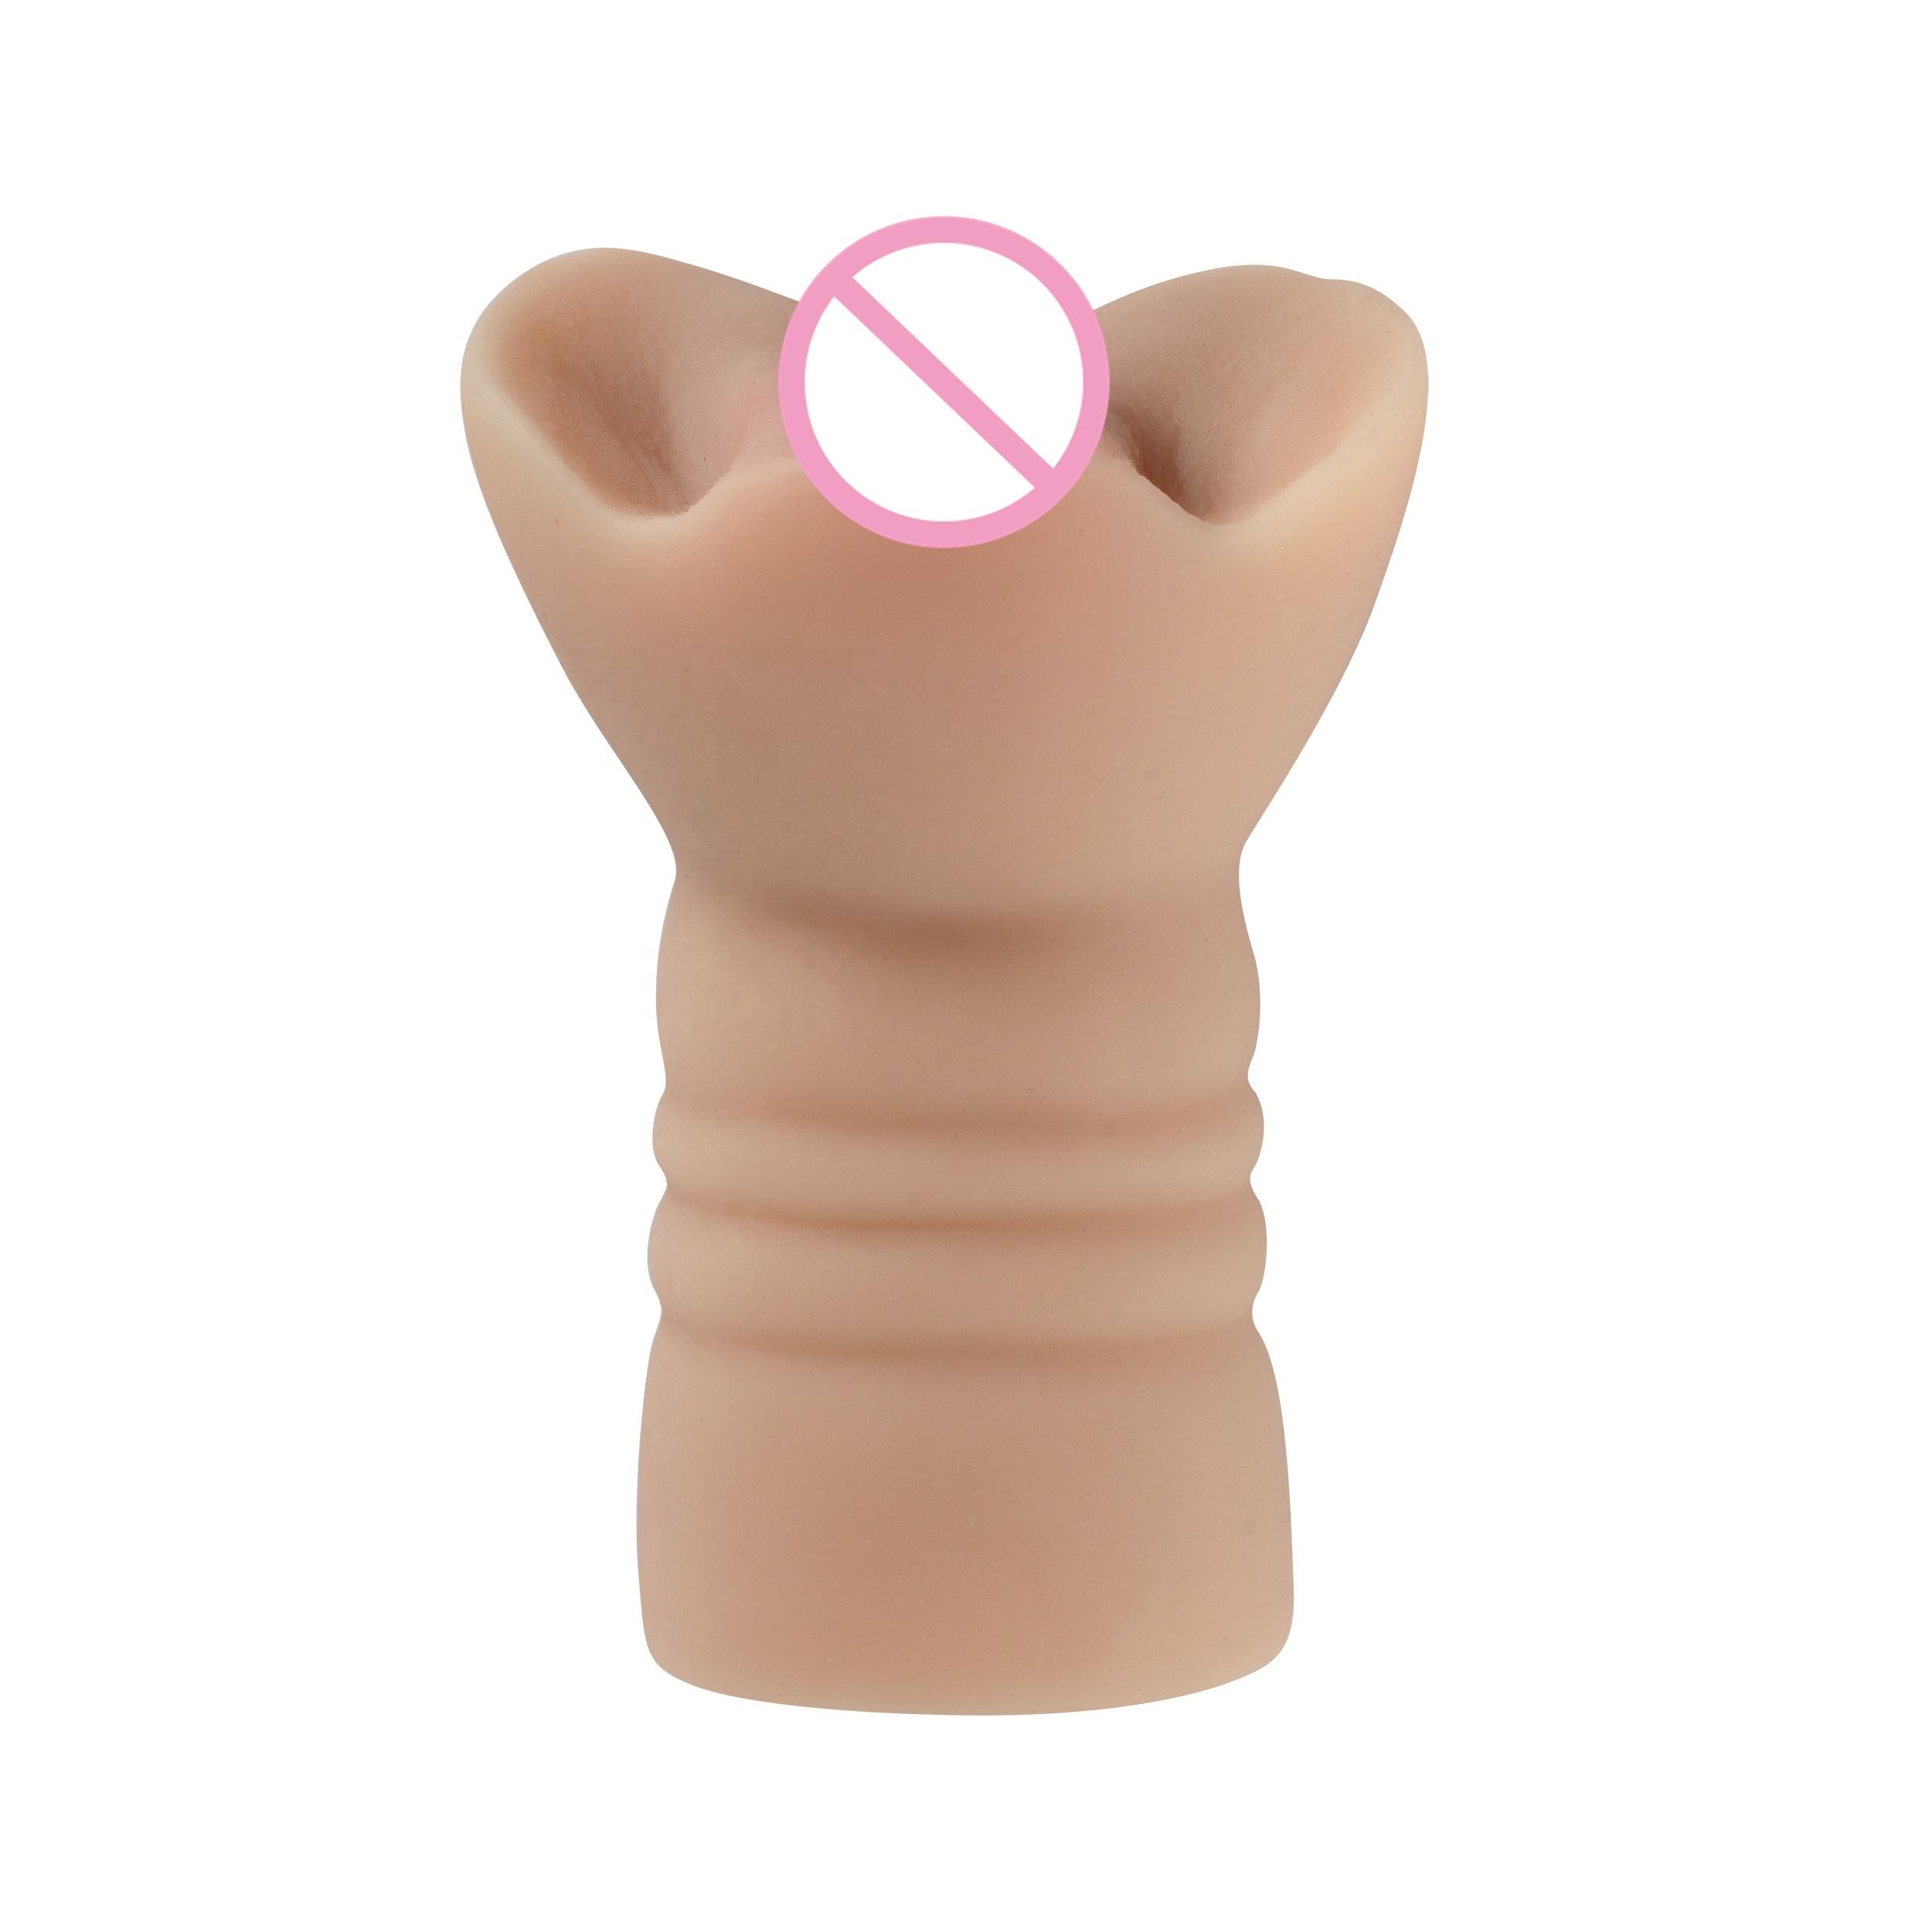  Mini Sex Doll With Mouth Vagina And Realistic Textured Tight Anus Masturbator Deep Throat Oral Adult Sex Toys For Male Men